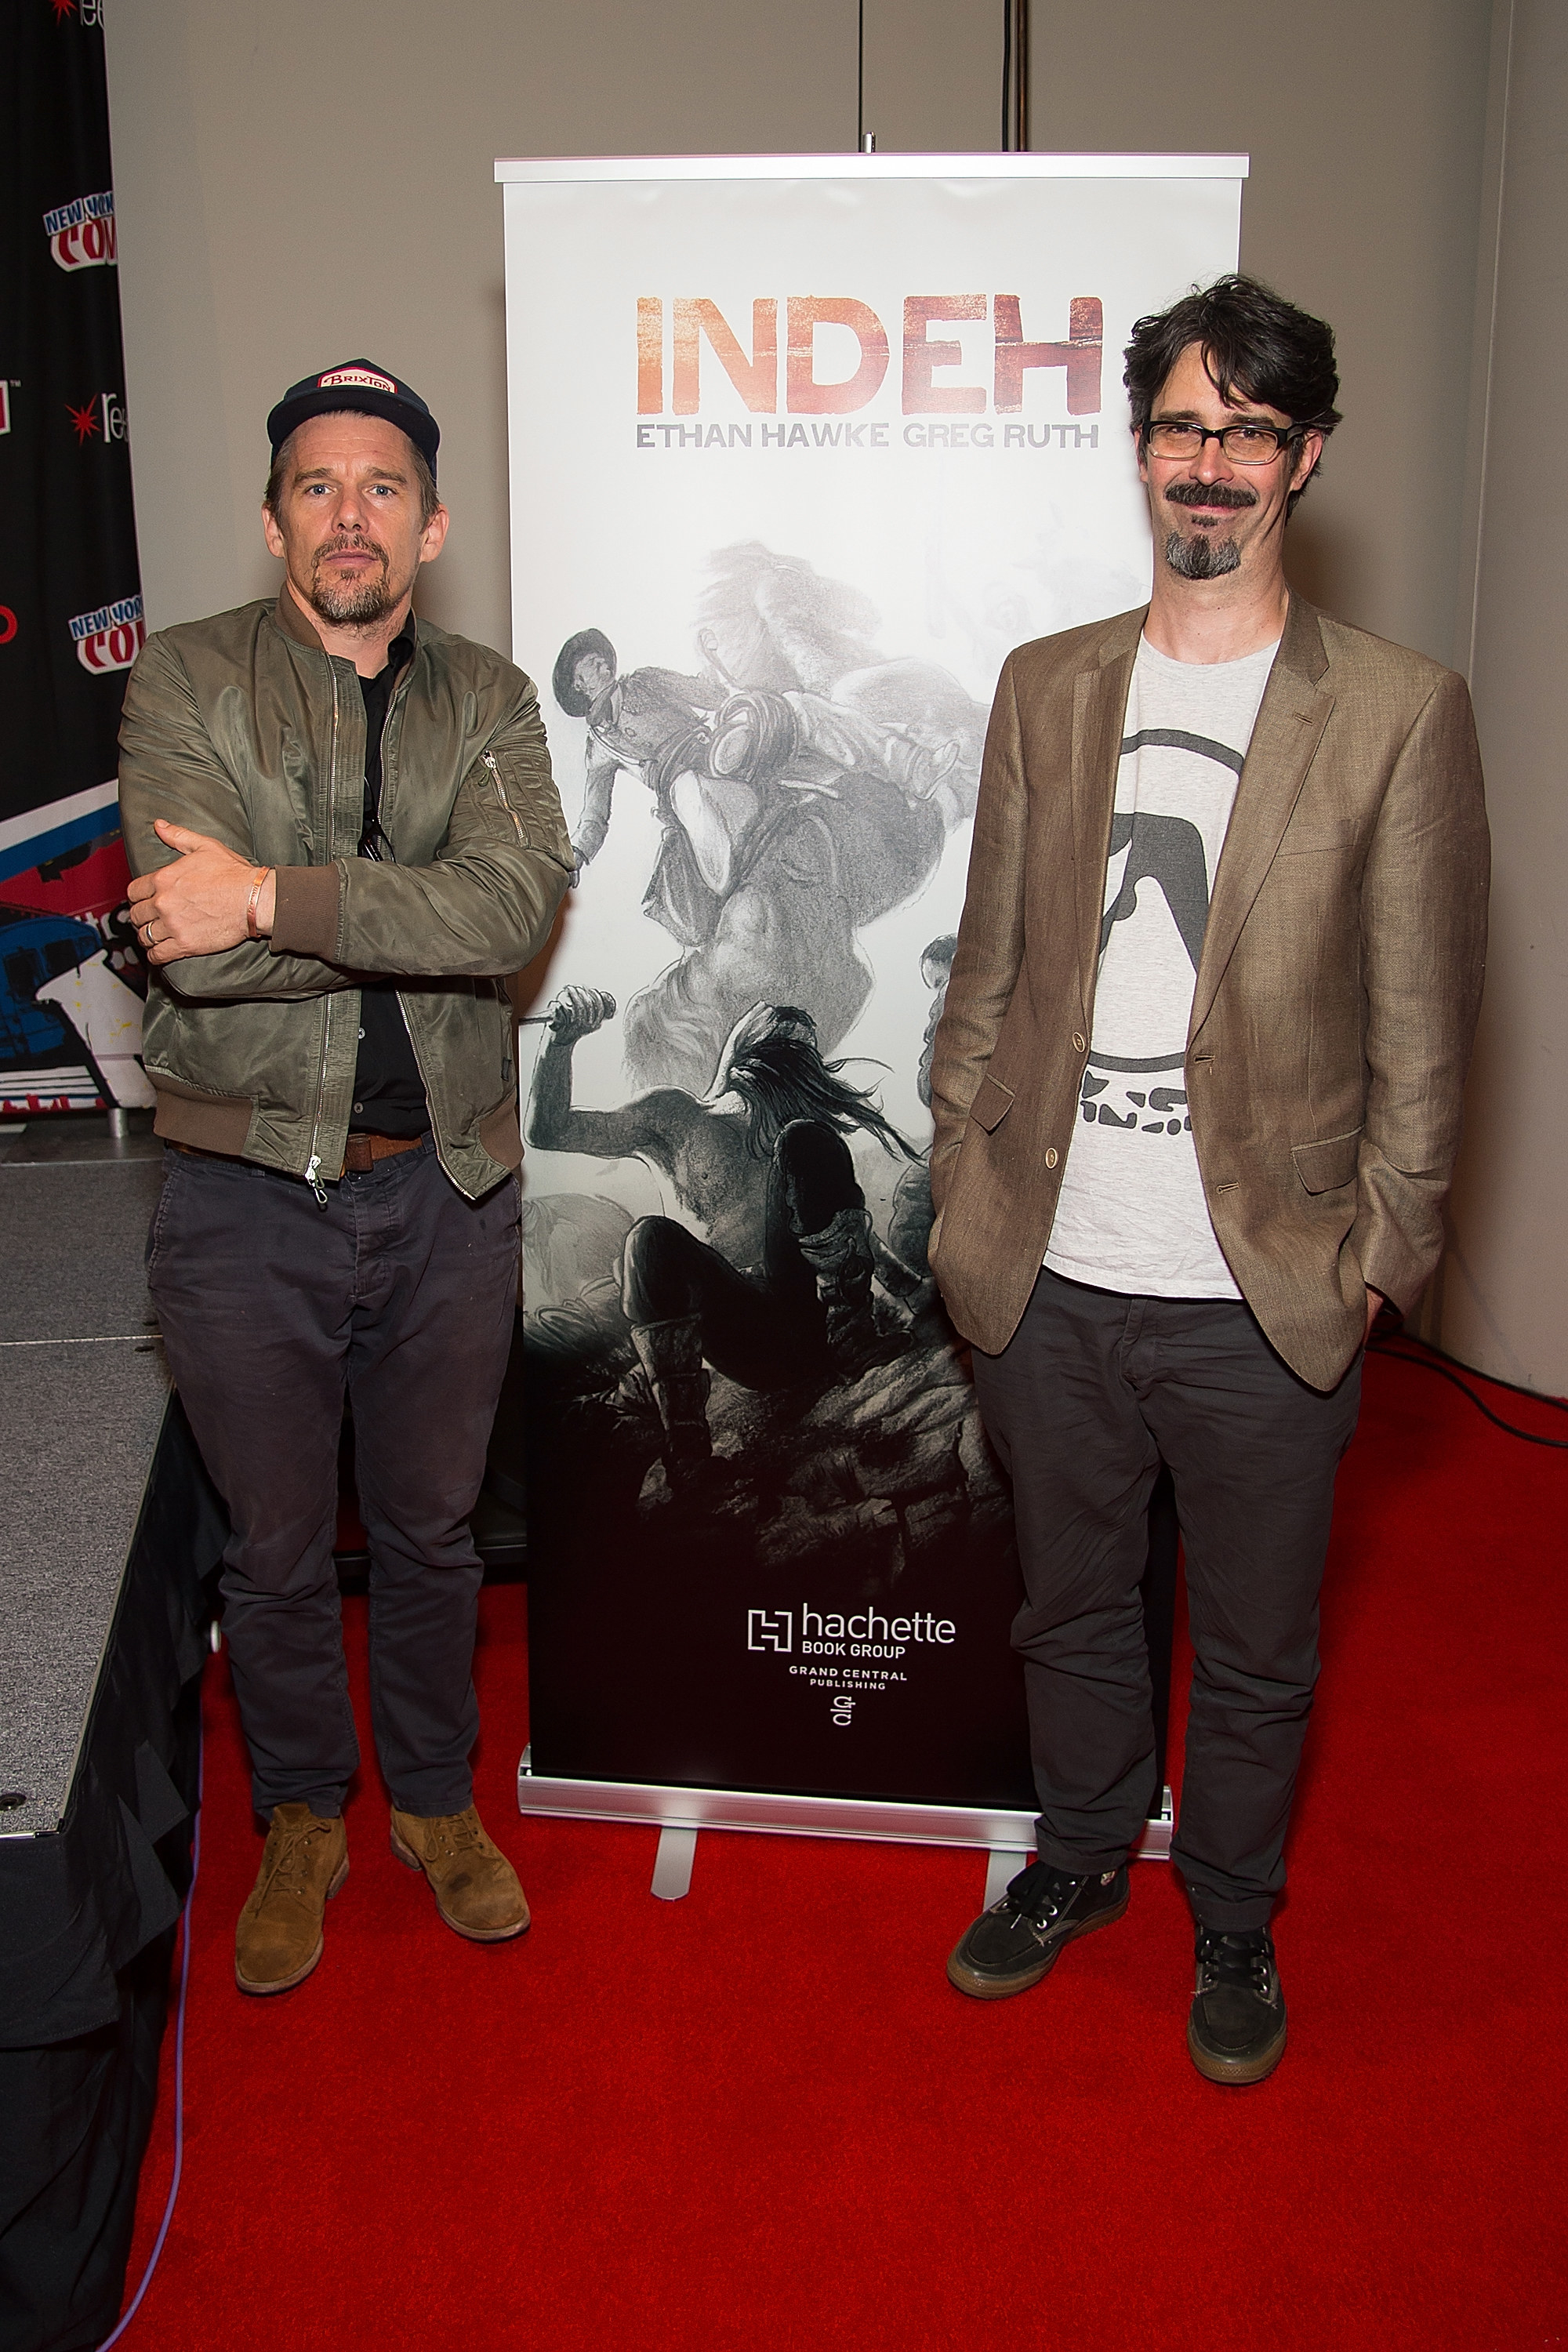 Ethan Hawke and Greg Ruth promoting &quot;Indeh&quot; at 2016 Comic Con